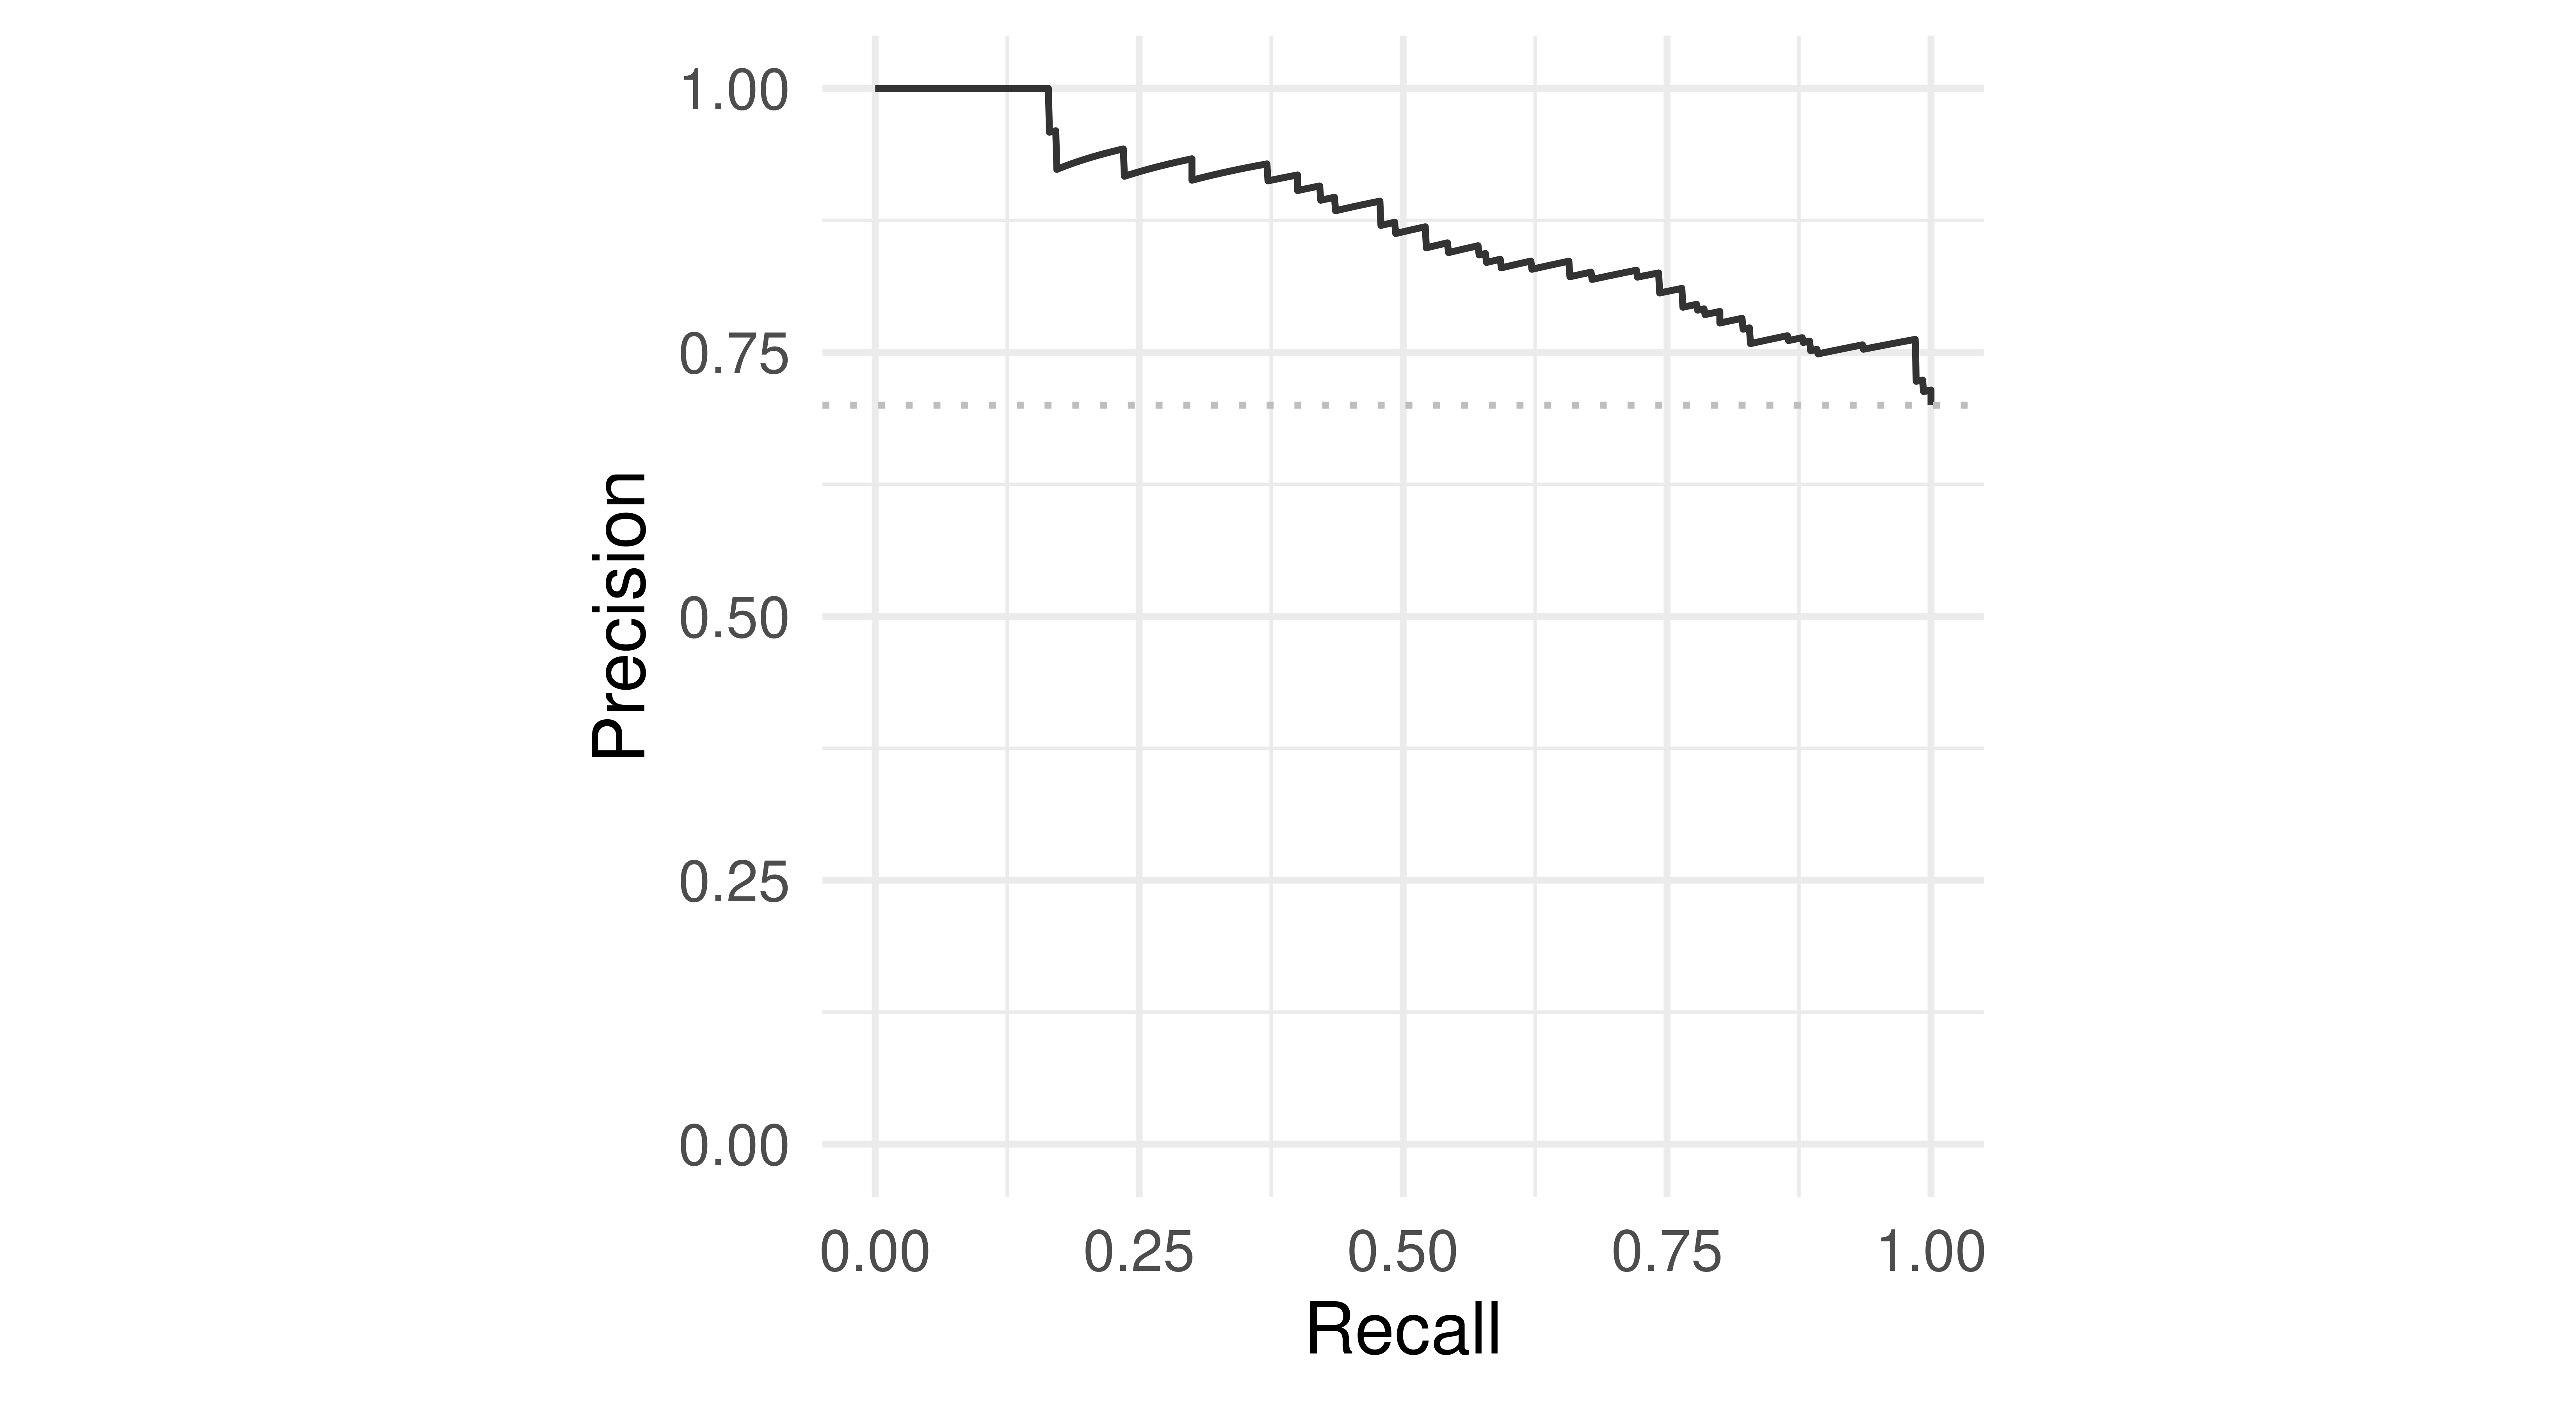 Line curve with "Recall" on x-axis (between 0-1) and "Precision" on y-axis (between 0-1). There is a horizontal line through around y=0.74. There is also a line decreasing from (0,1) to (1,0.74).